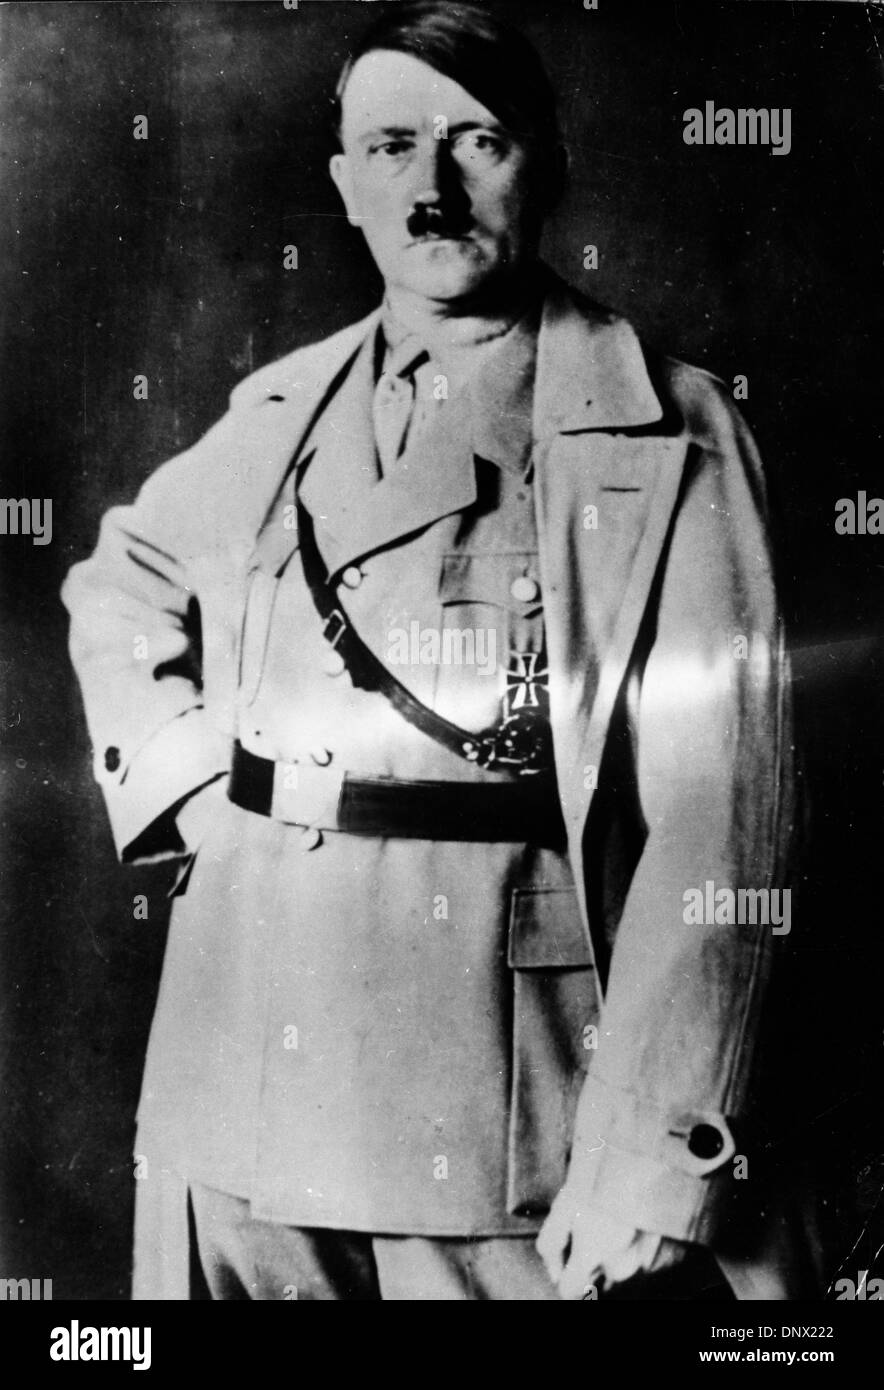 April 11, 1939 - Berlin, Germany - ADOLF HITLER (April 20, 1889-April 30, 1945) was the Fuhrer und Reichskanzler (Leader and Imperial chancellor) of Germany from 1933 to his death. He was leader of the National Socialist German Workers Party (NSDAP), better known as the Nazi Party. (Credit Image: © KEYSTONE Pictures USA/ZUMAPRESS.com) Stock Photo